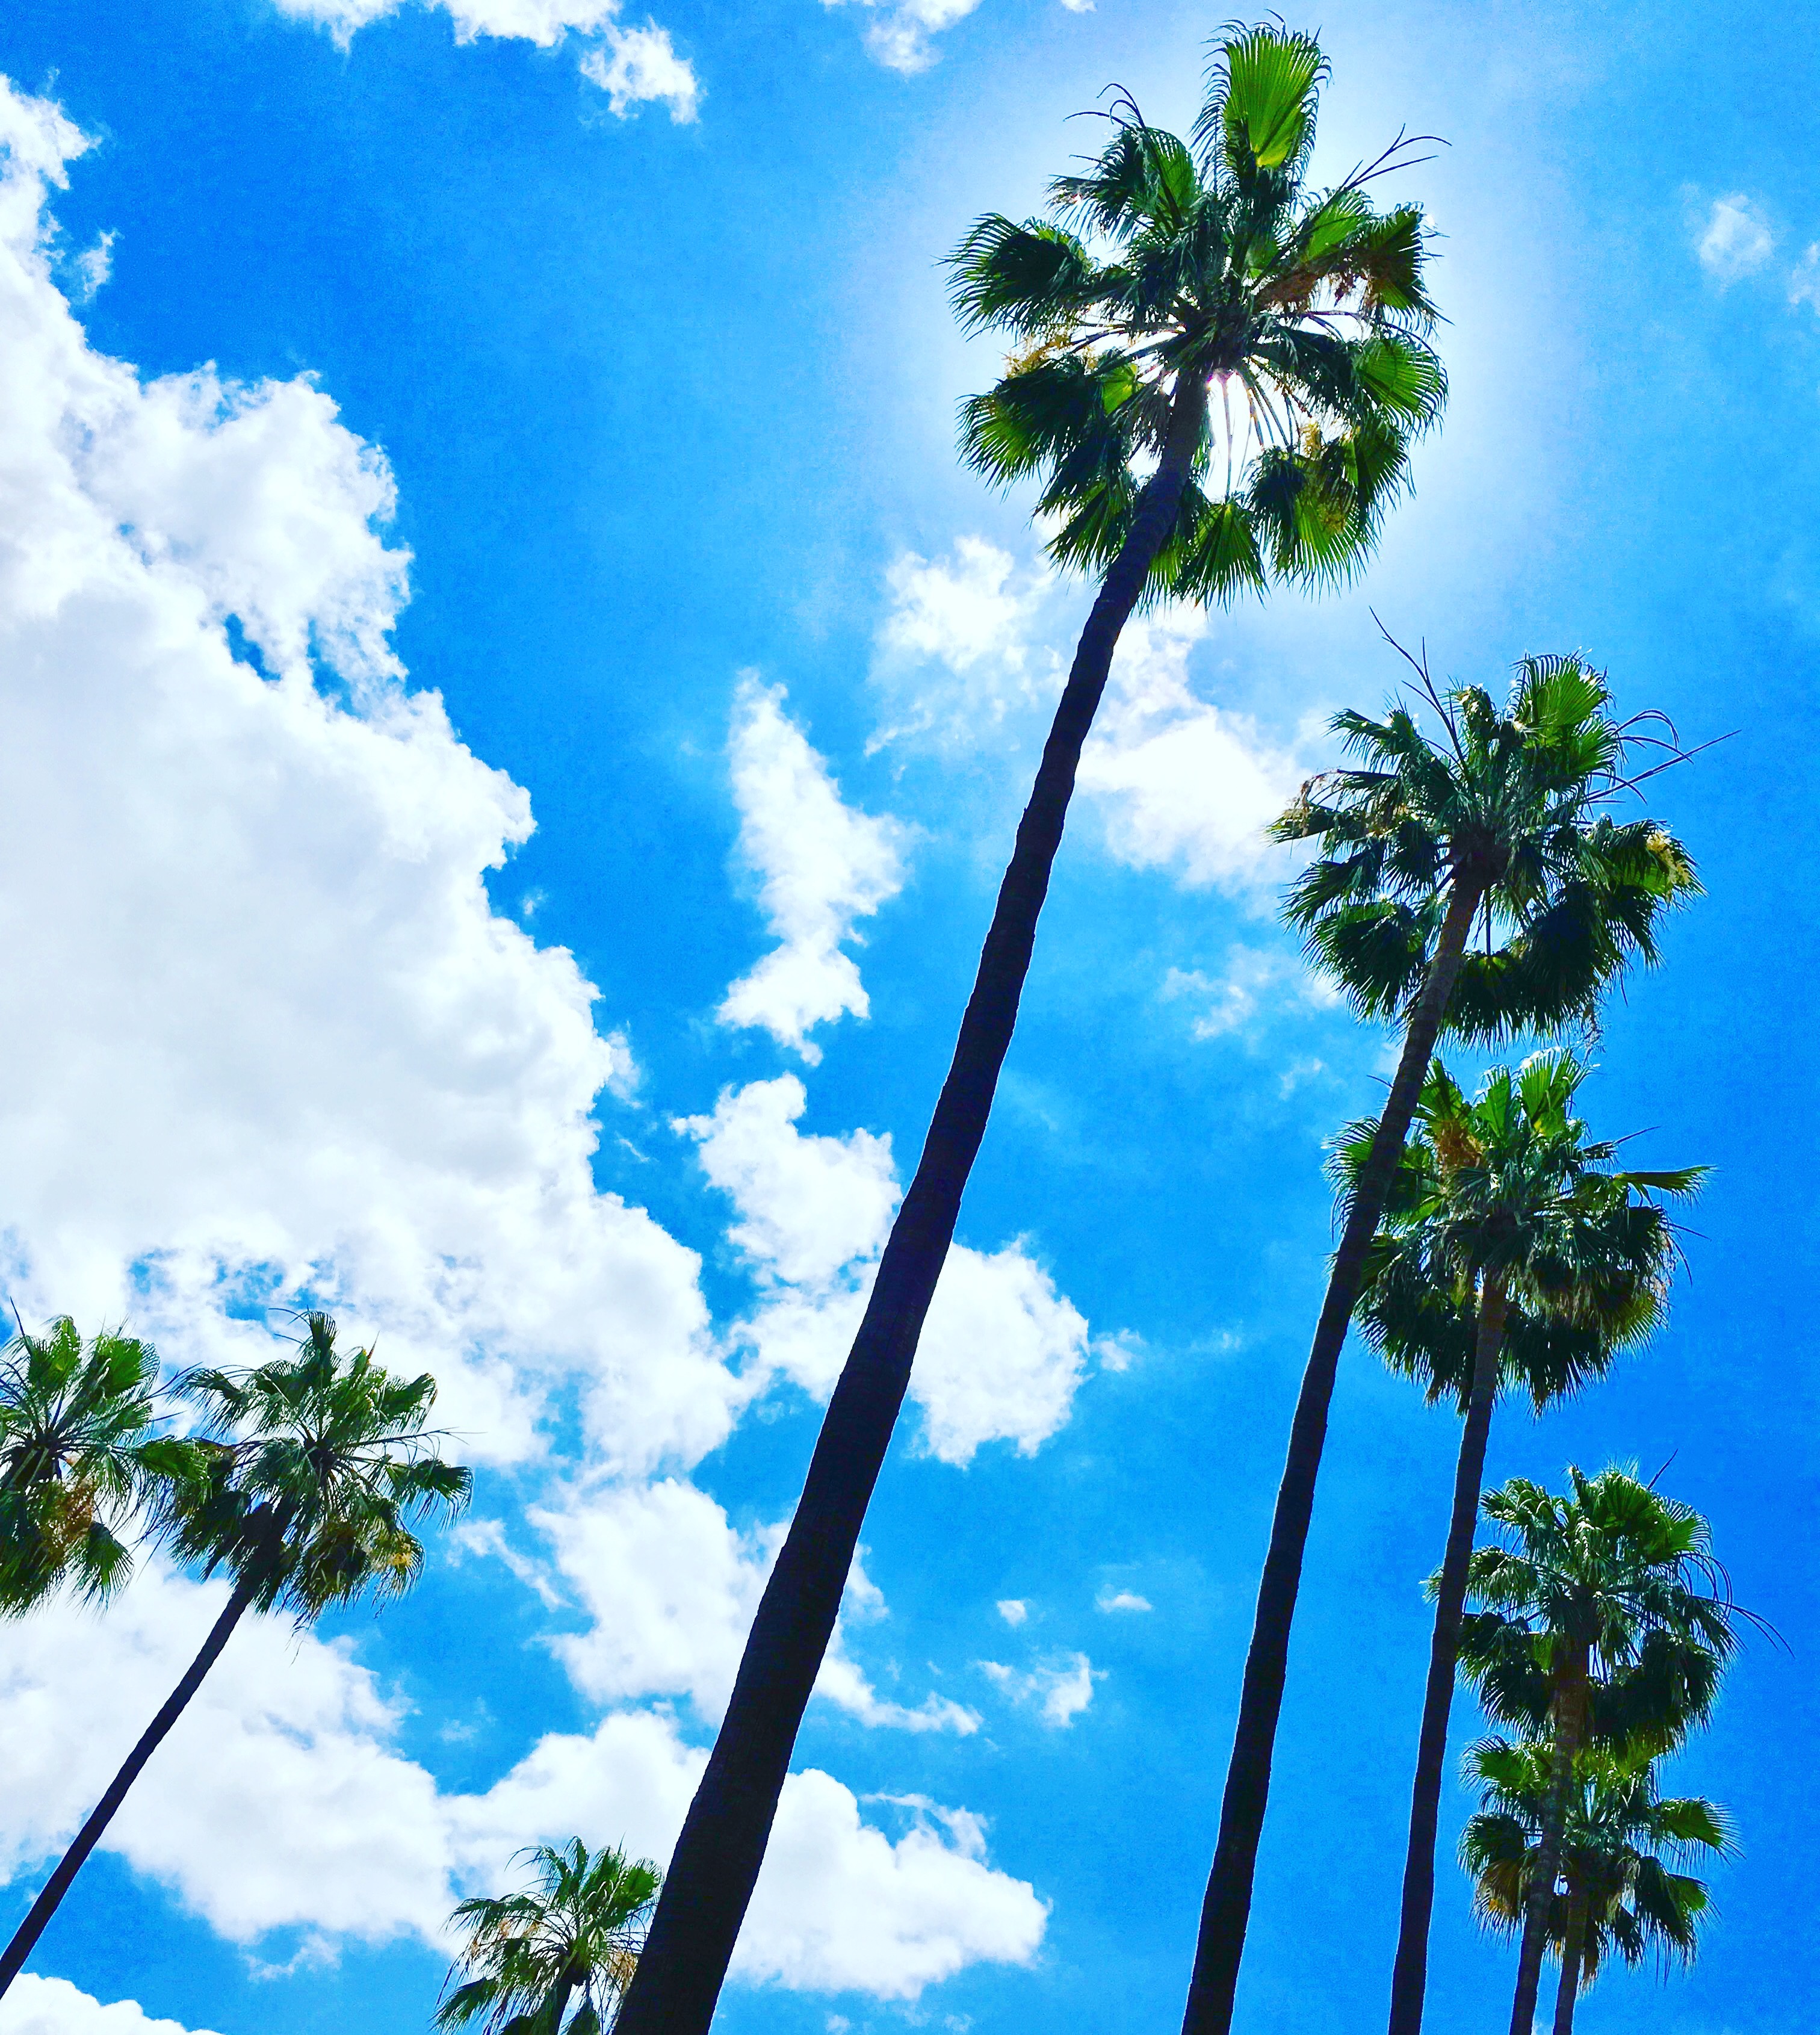 The signature palm trees in Beverly Hills this beautiful Sunday.